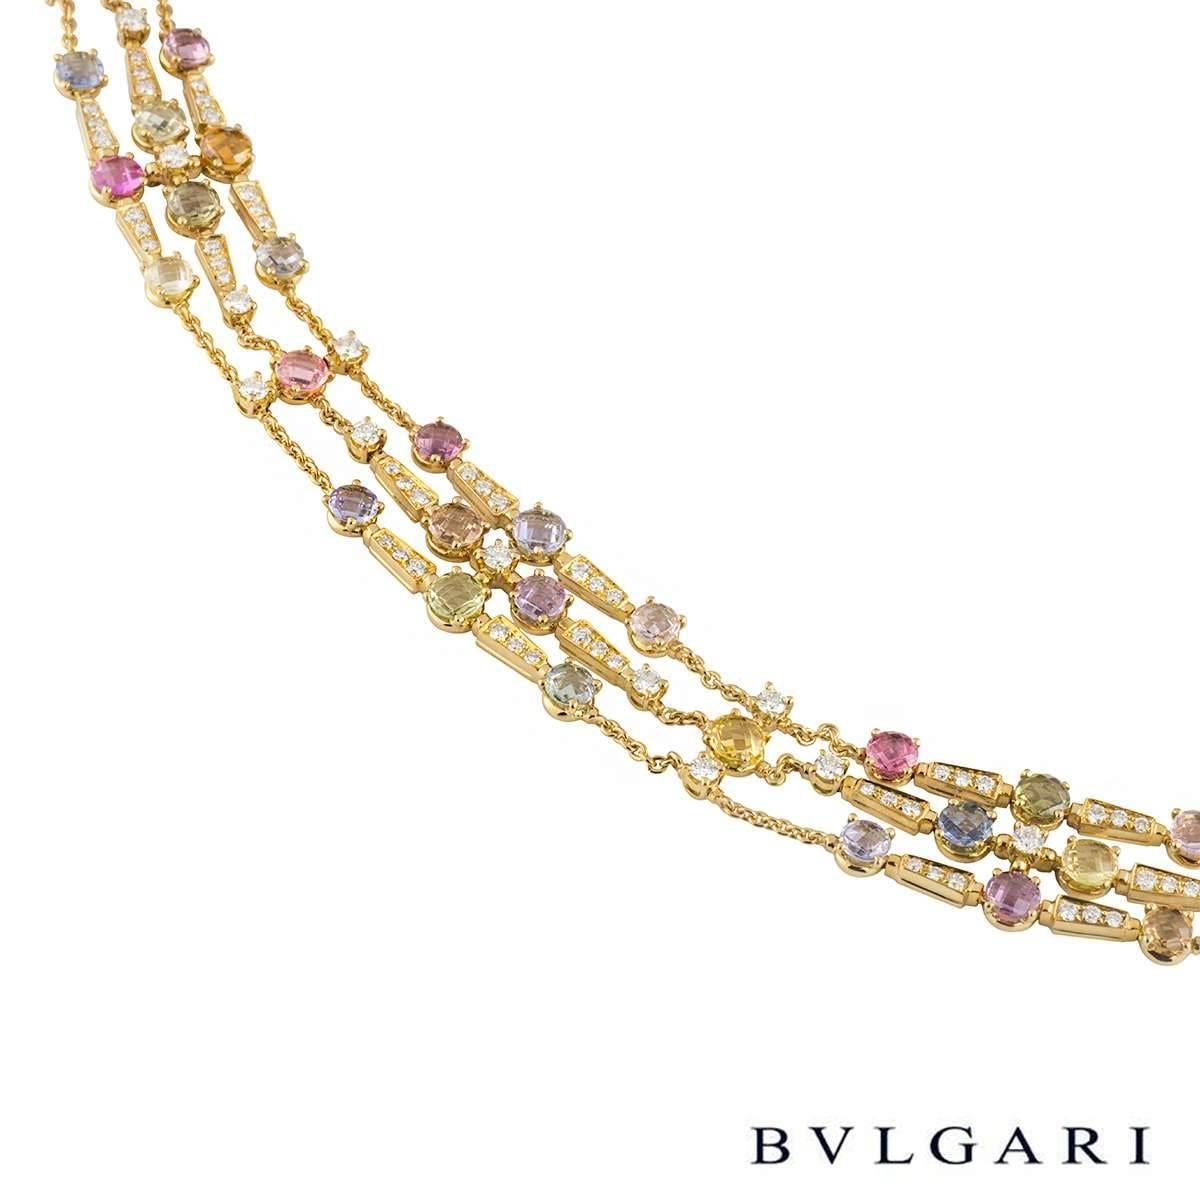 A beautiful 18k yellow gold Bvlgari multi-gemstone necklace from the Rosette collection. The necklace is of a choker style and comprises of 3 chained rows of 47 fancy sapphires and 28 diamonds in a 4 claw setting, abstractly placed. The total